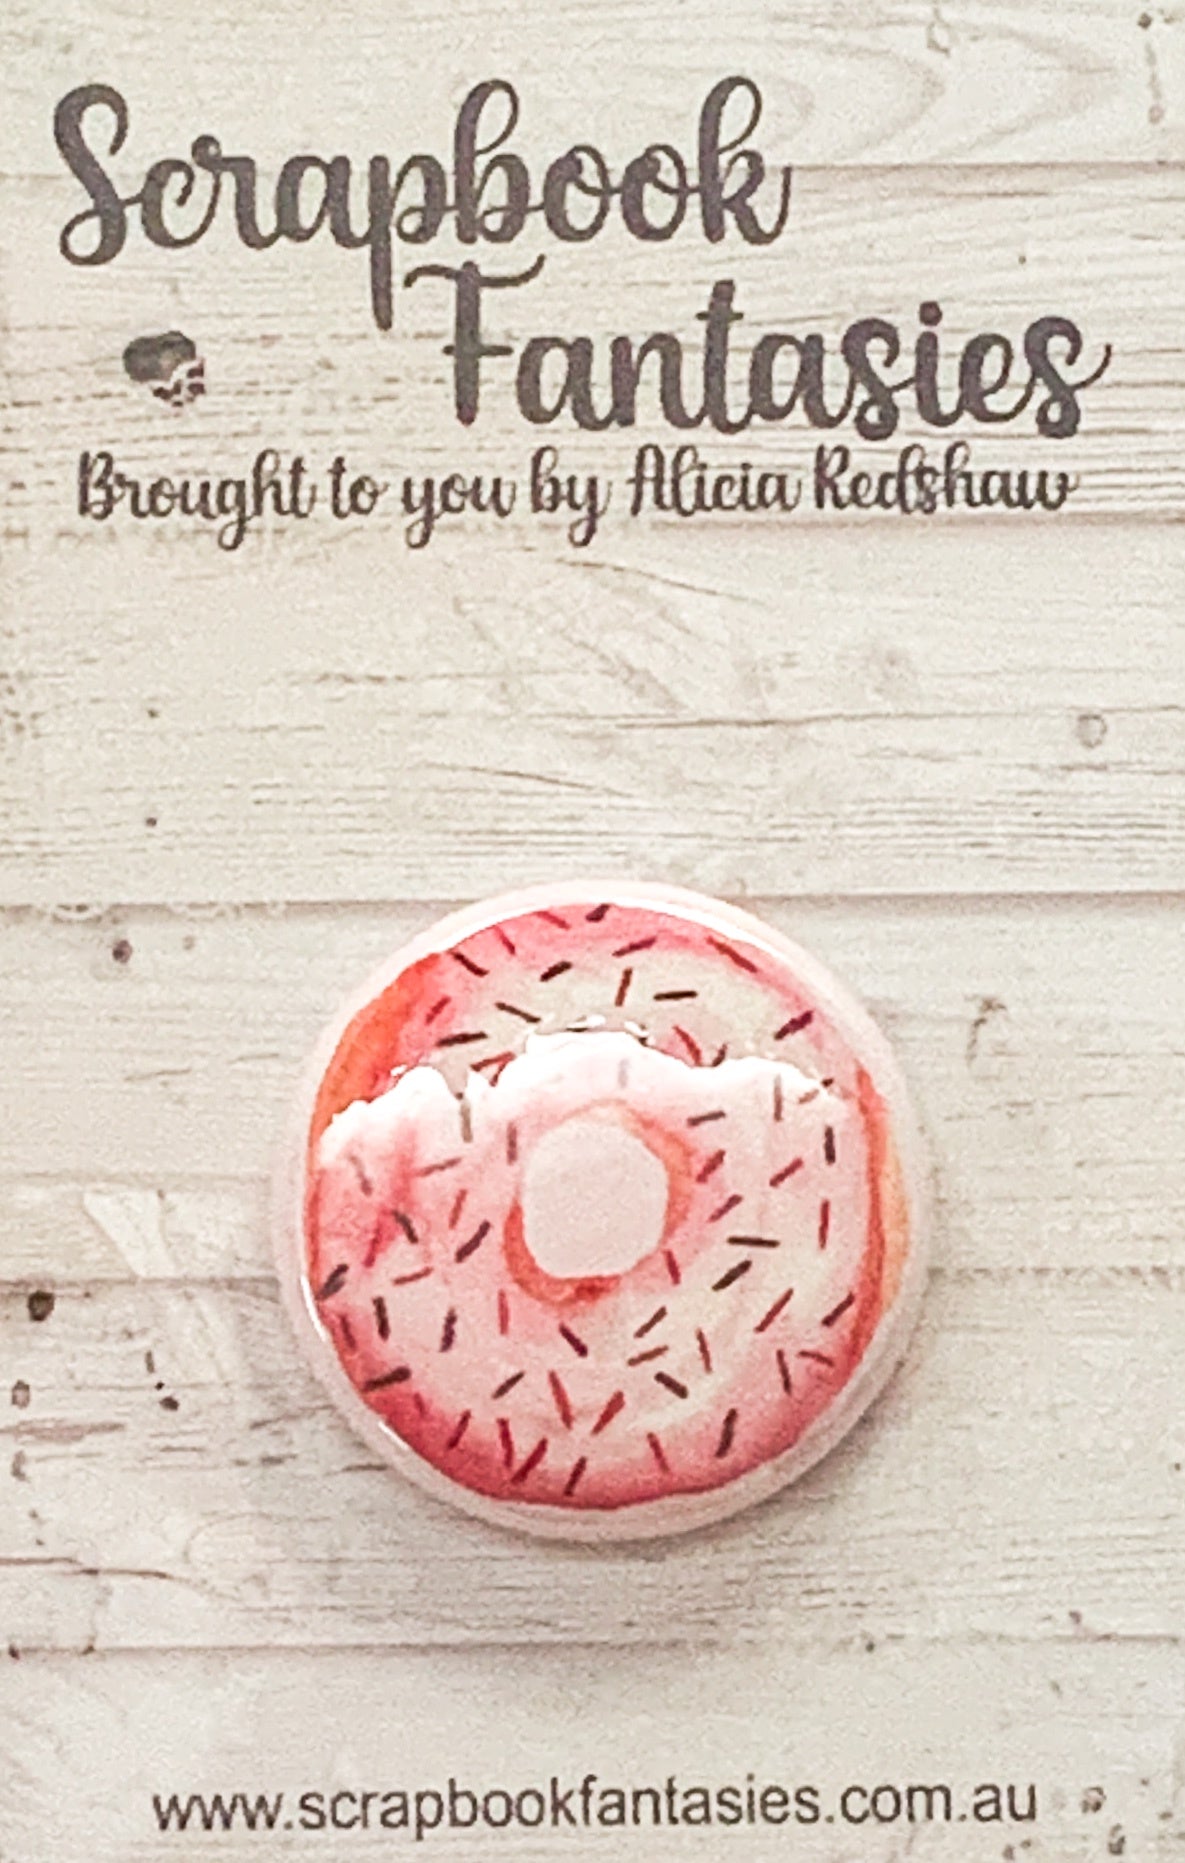 Flair Button [1"] - Pink Donut (1 piece) Designed by Alicia Redshaw